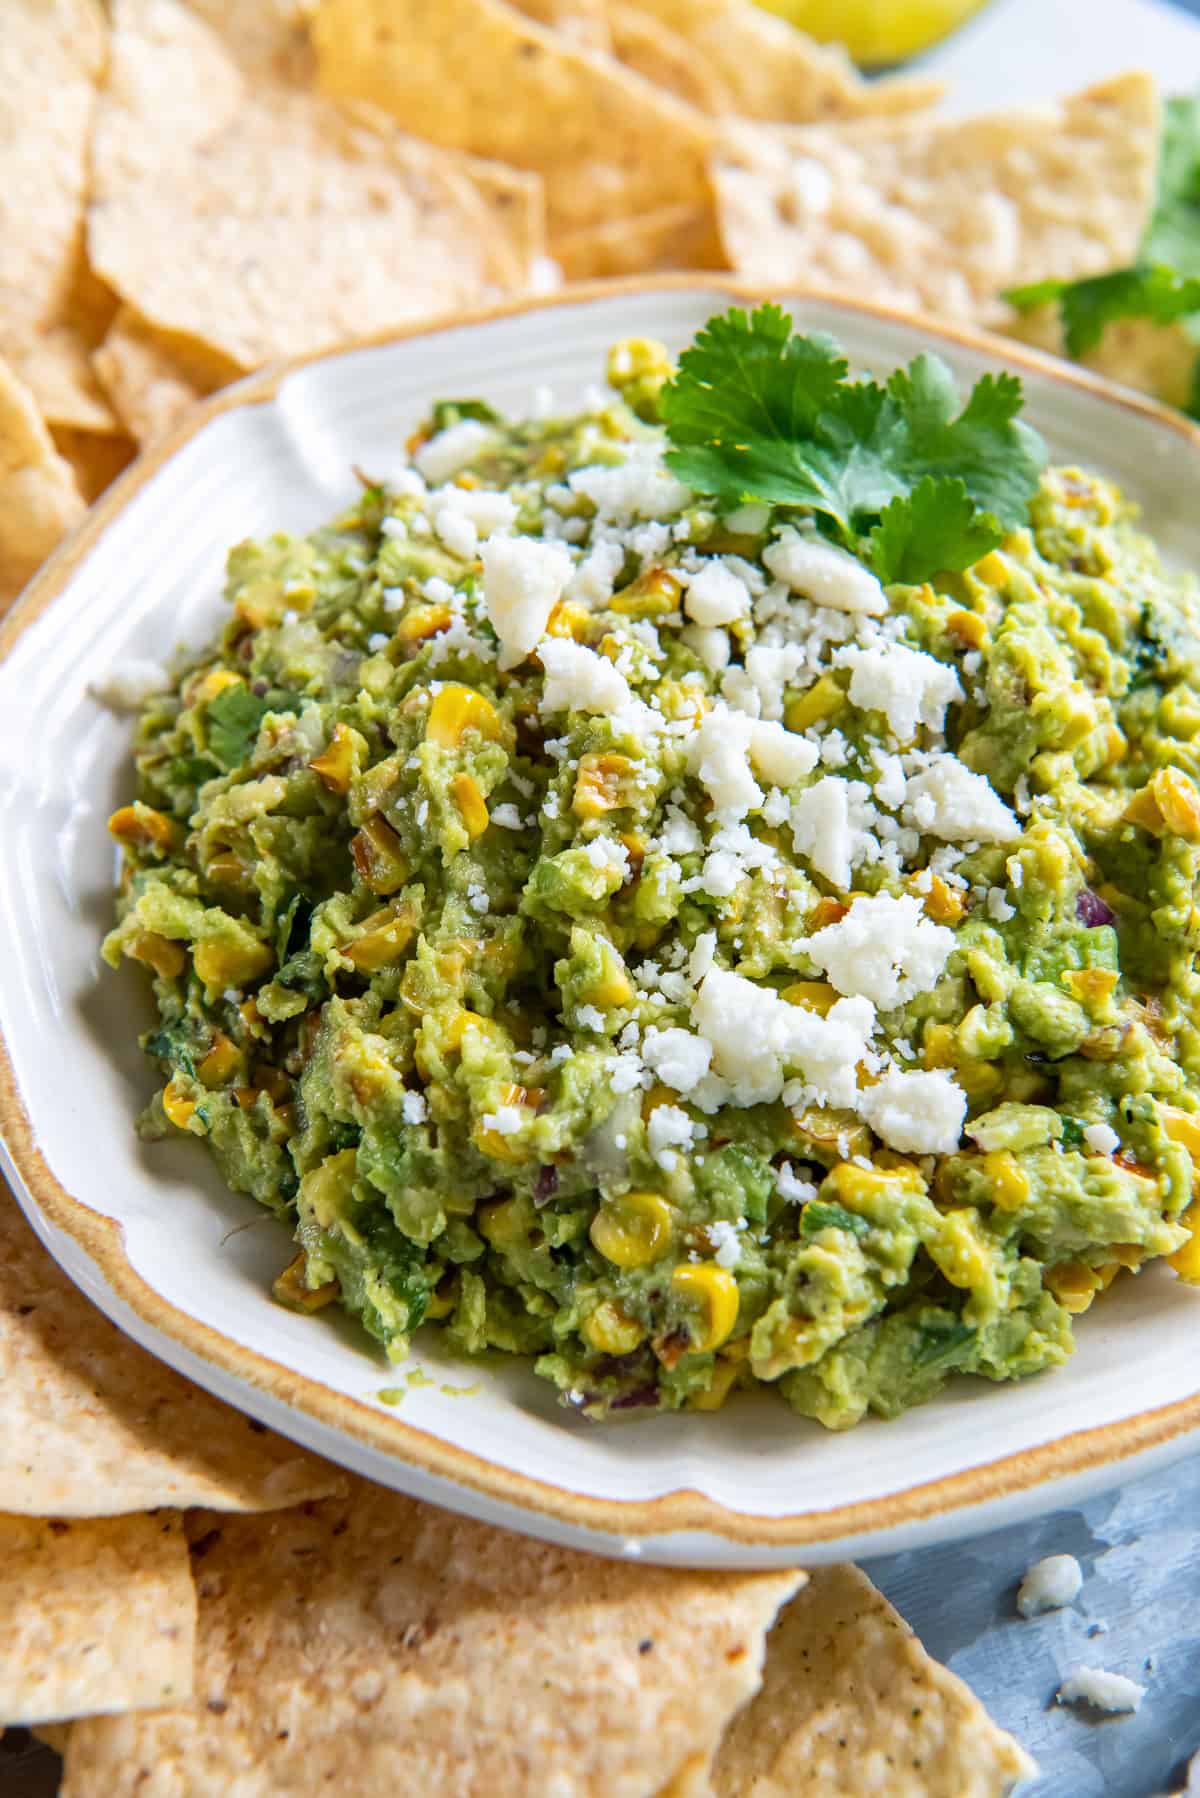 Corn guacamole in a white bowl surrounded by tortilla chips.